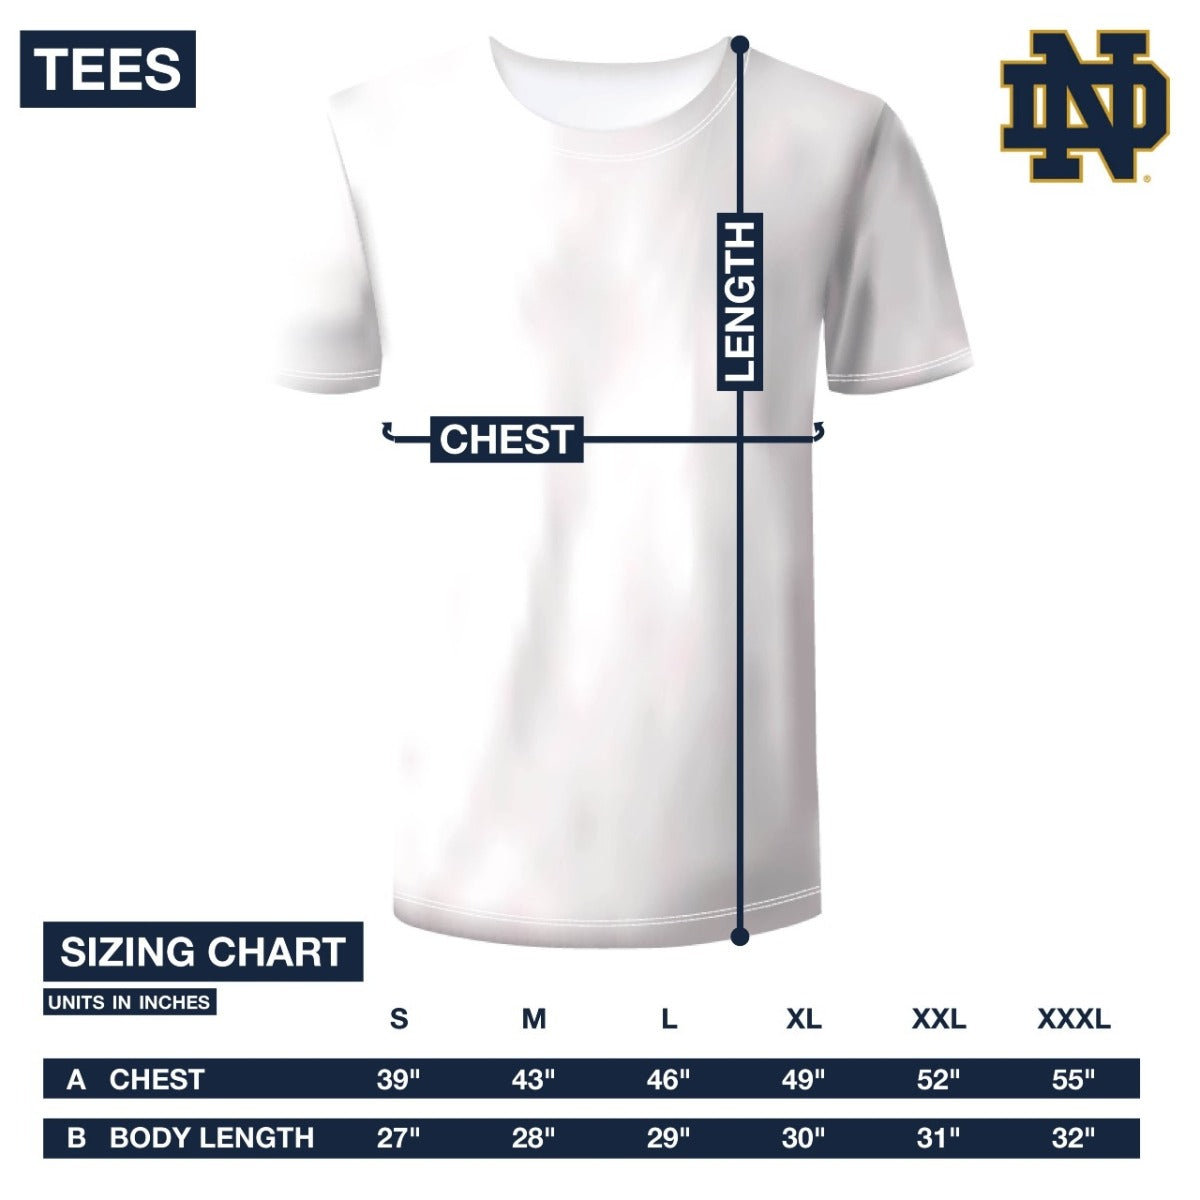 A white Guinness t-shirt with a measurement chart featuring the Notre Dame helmet.